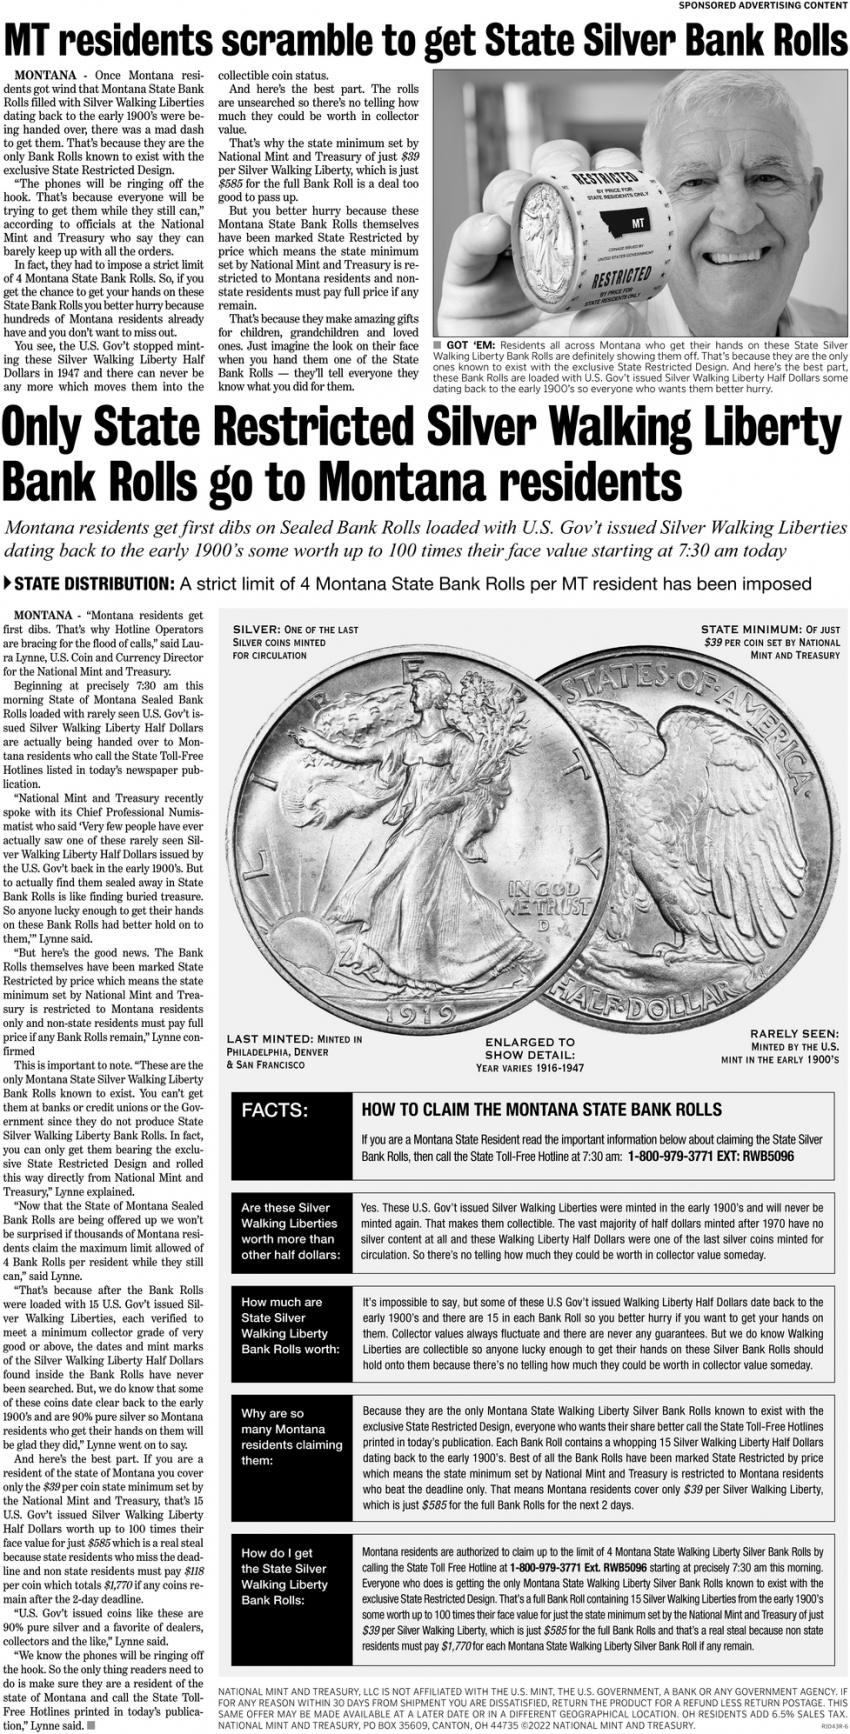 MT Residents Scramble To Get State Silver Bank Rolls